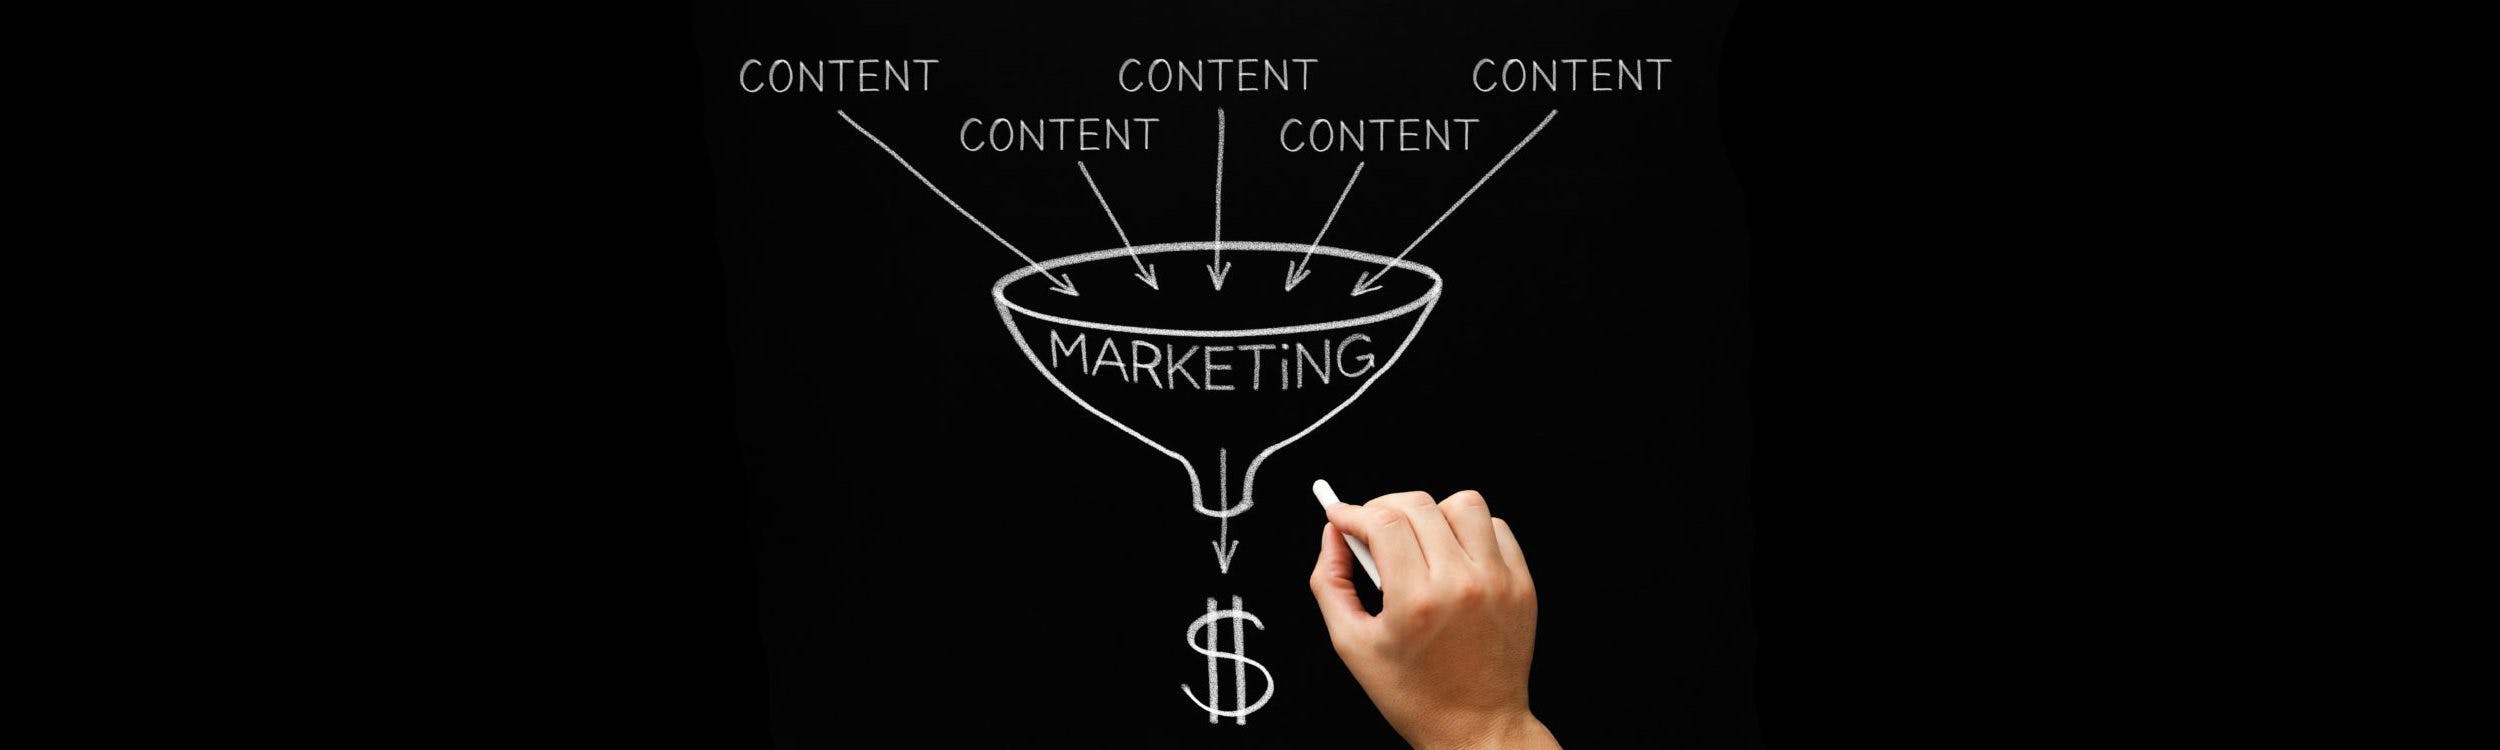 Marketing content funnel